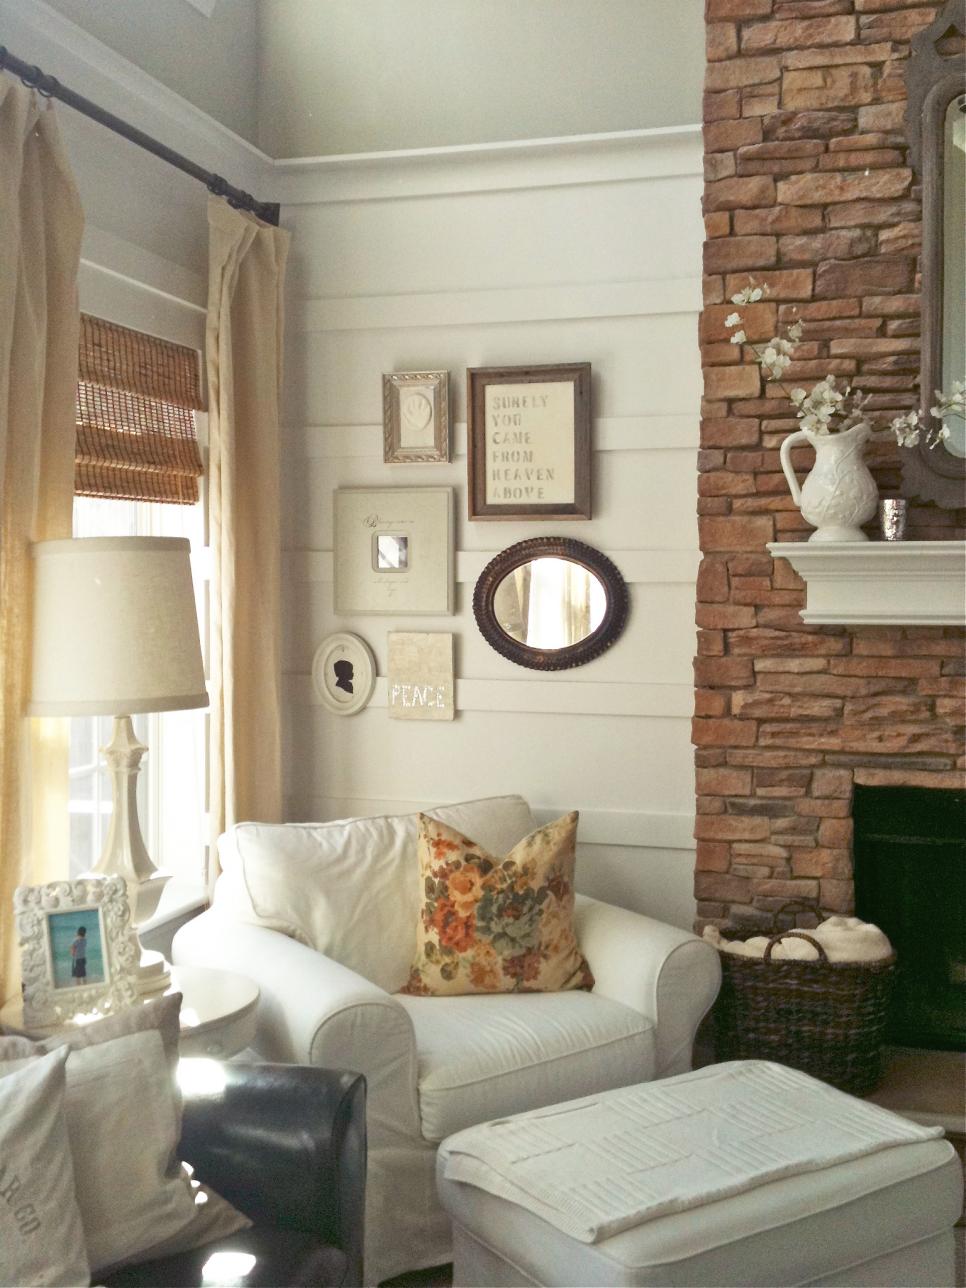 Cottage Living Room With Eclectic Wall Collage | HGTV